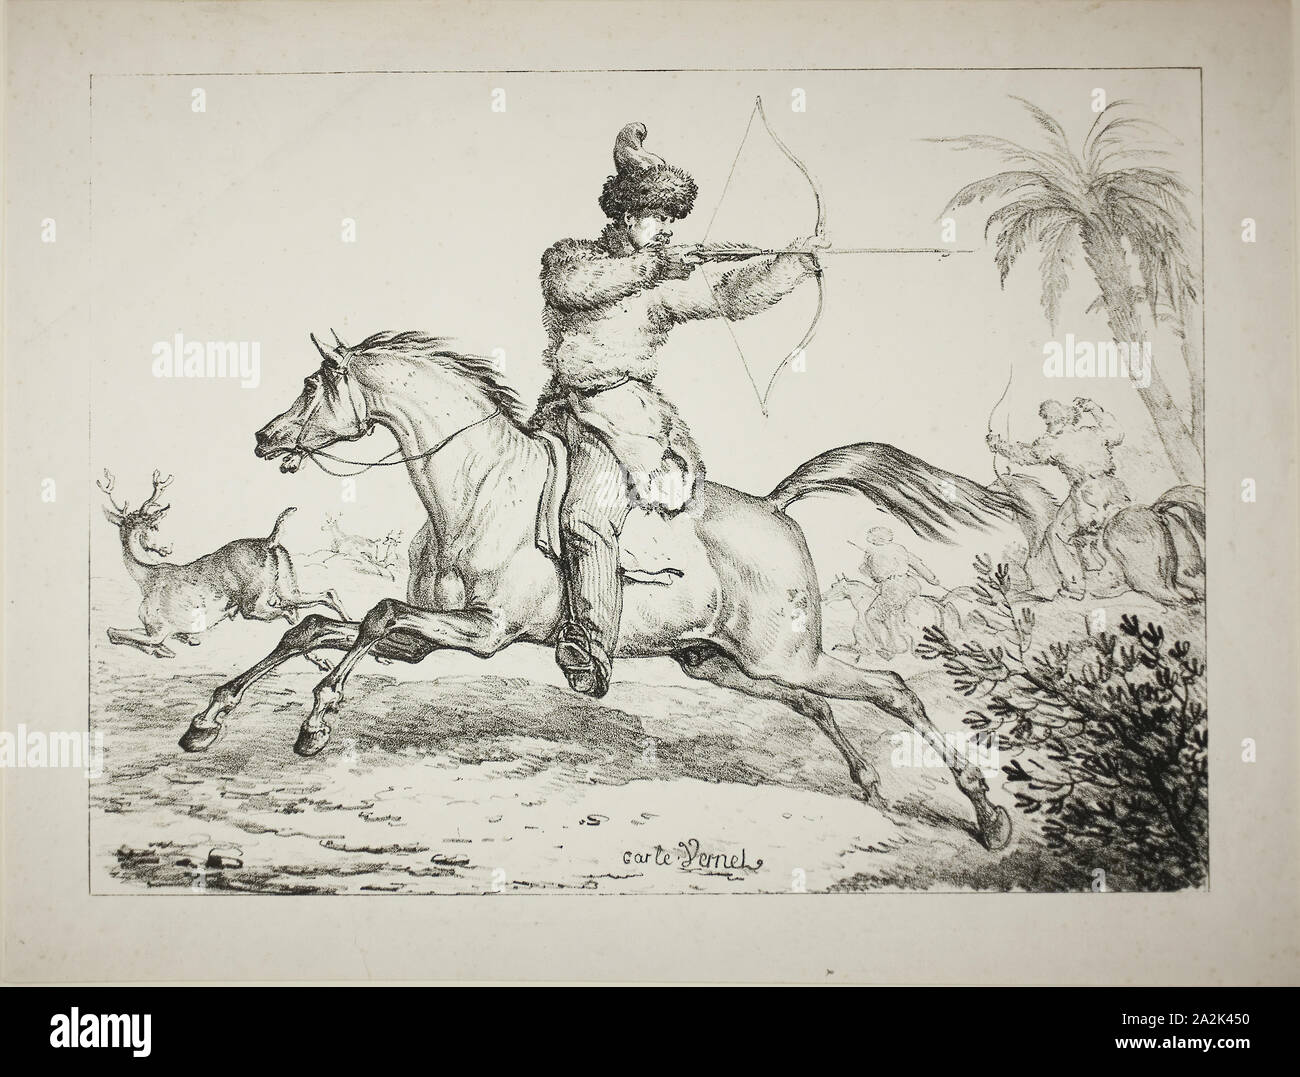 Kalmouk Archers Hunting Deer, c. 1820, Carle Vernet (French, 1758-1836), printed by Comte Charles Philibert de Lasteyrie (French, 1759-1849), France, Lithograph in black on ivory wove paper, 256 × 347 mm (image), 306 × 401 mm (sheet Stock Photo